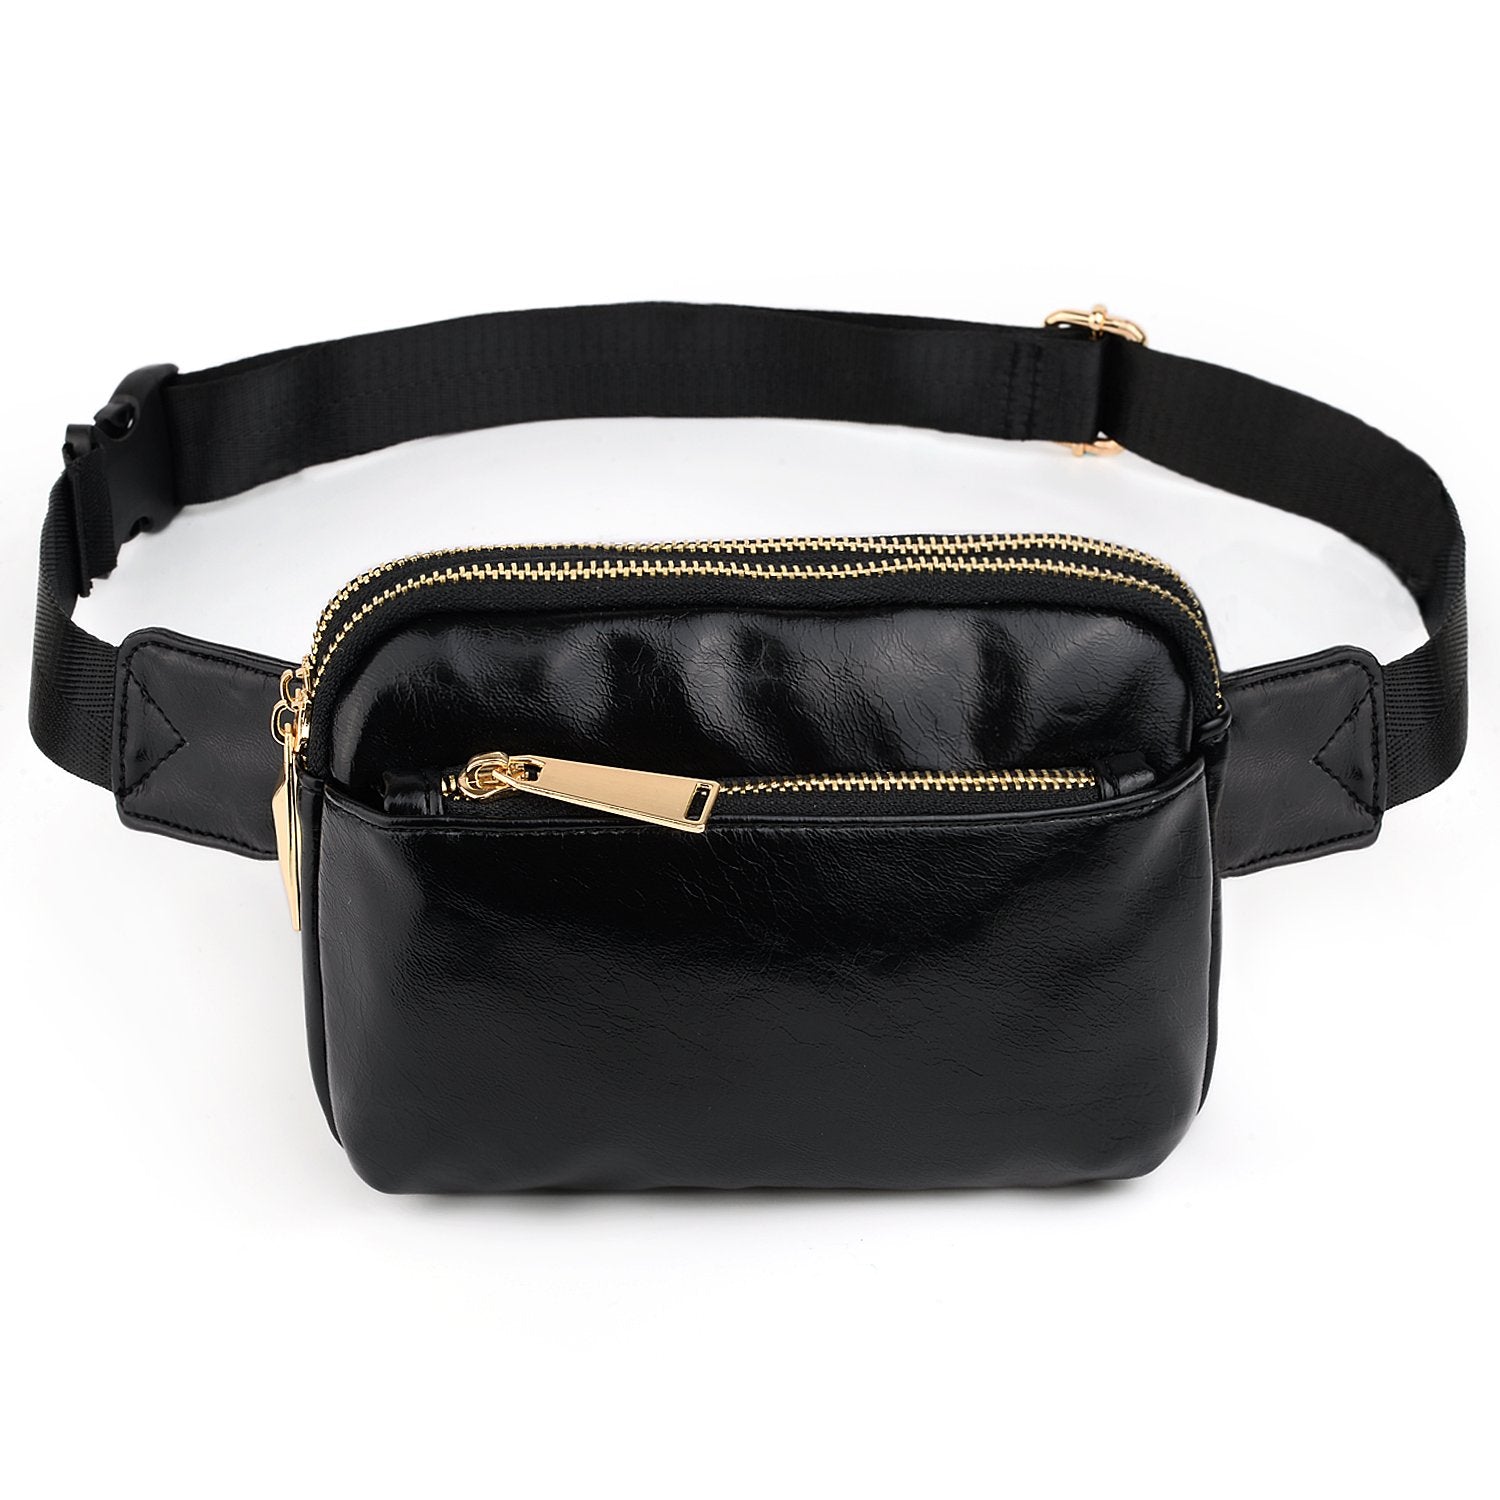 TRI ZIPPER Black Leather Hip Bag Backpack and Fanny Pack w/ Gold